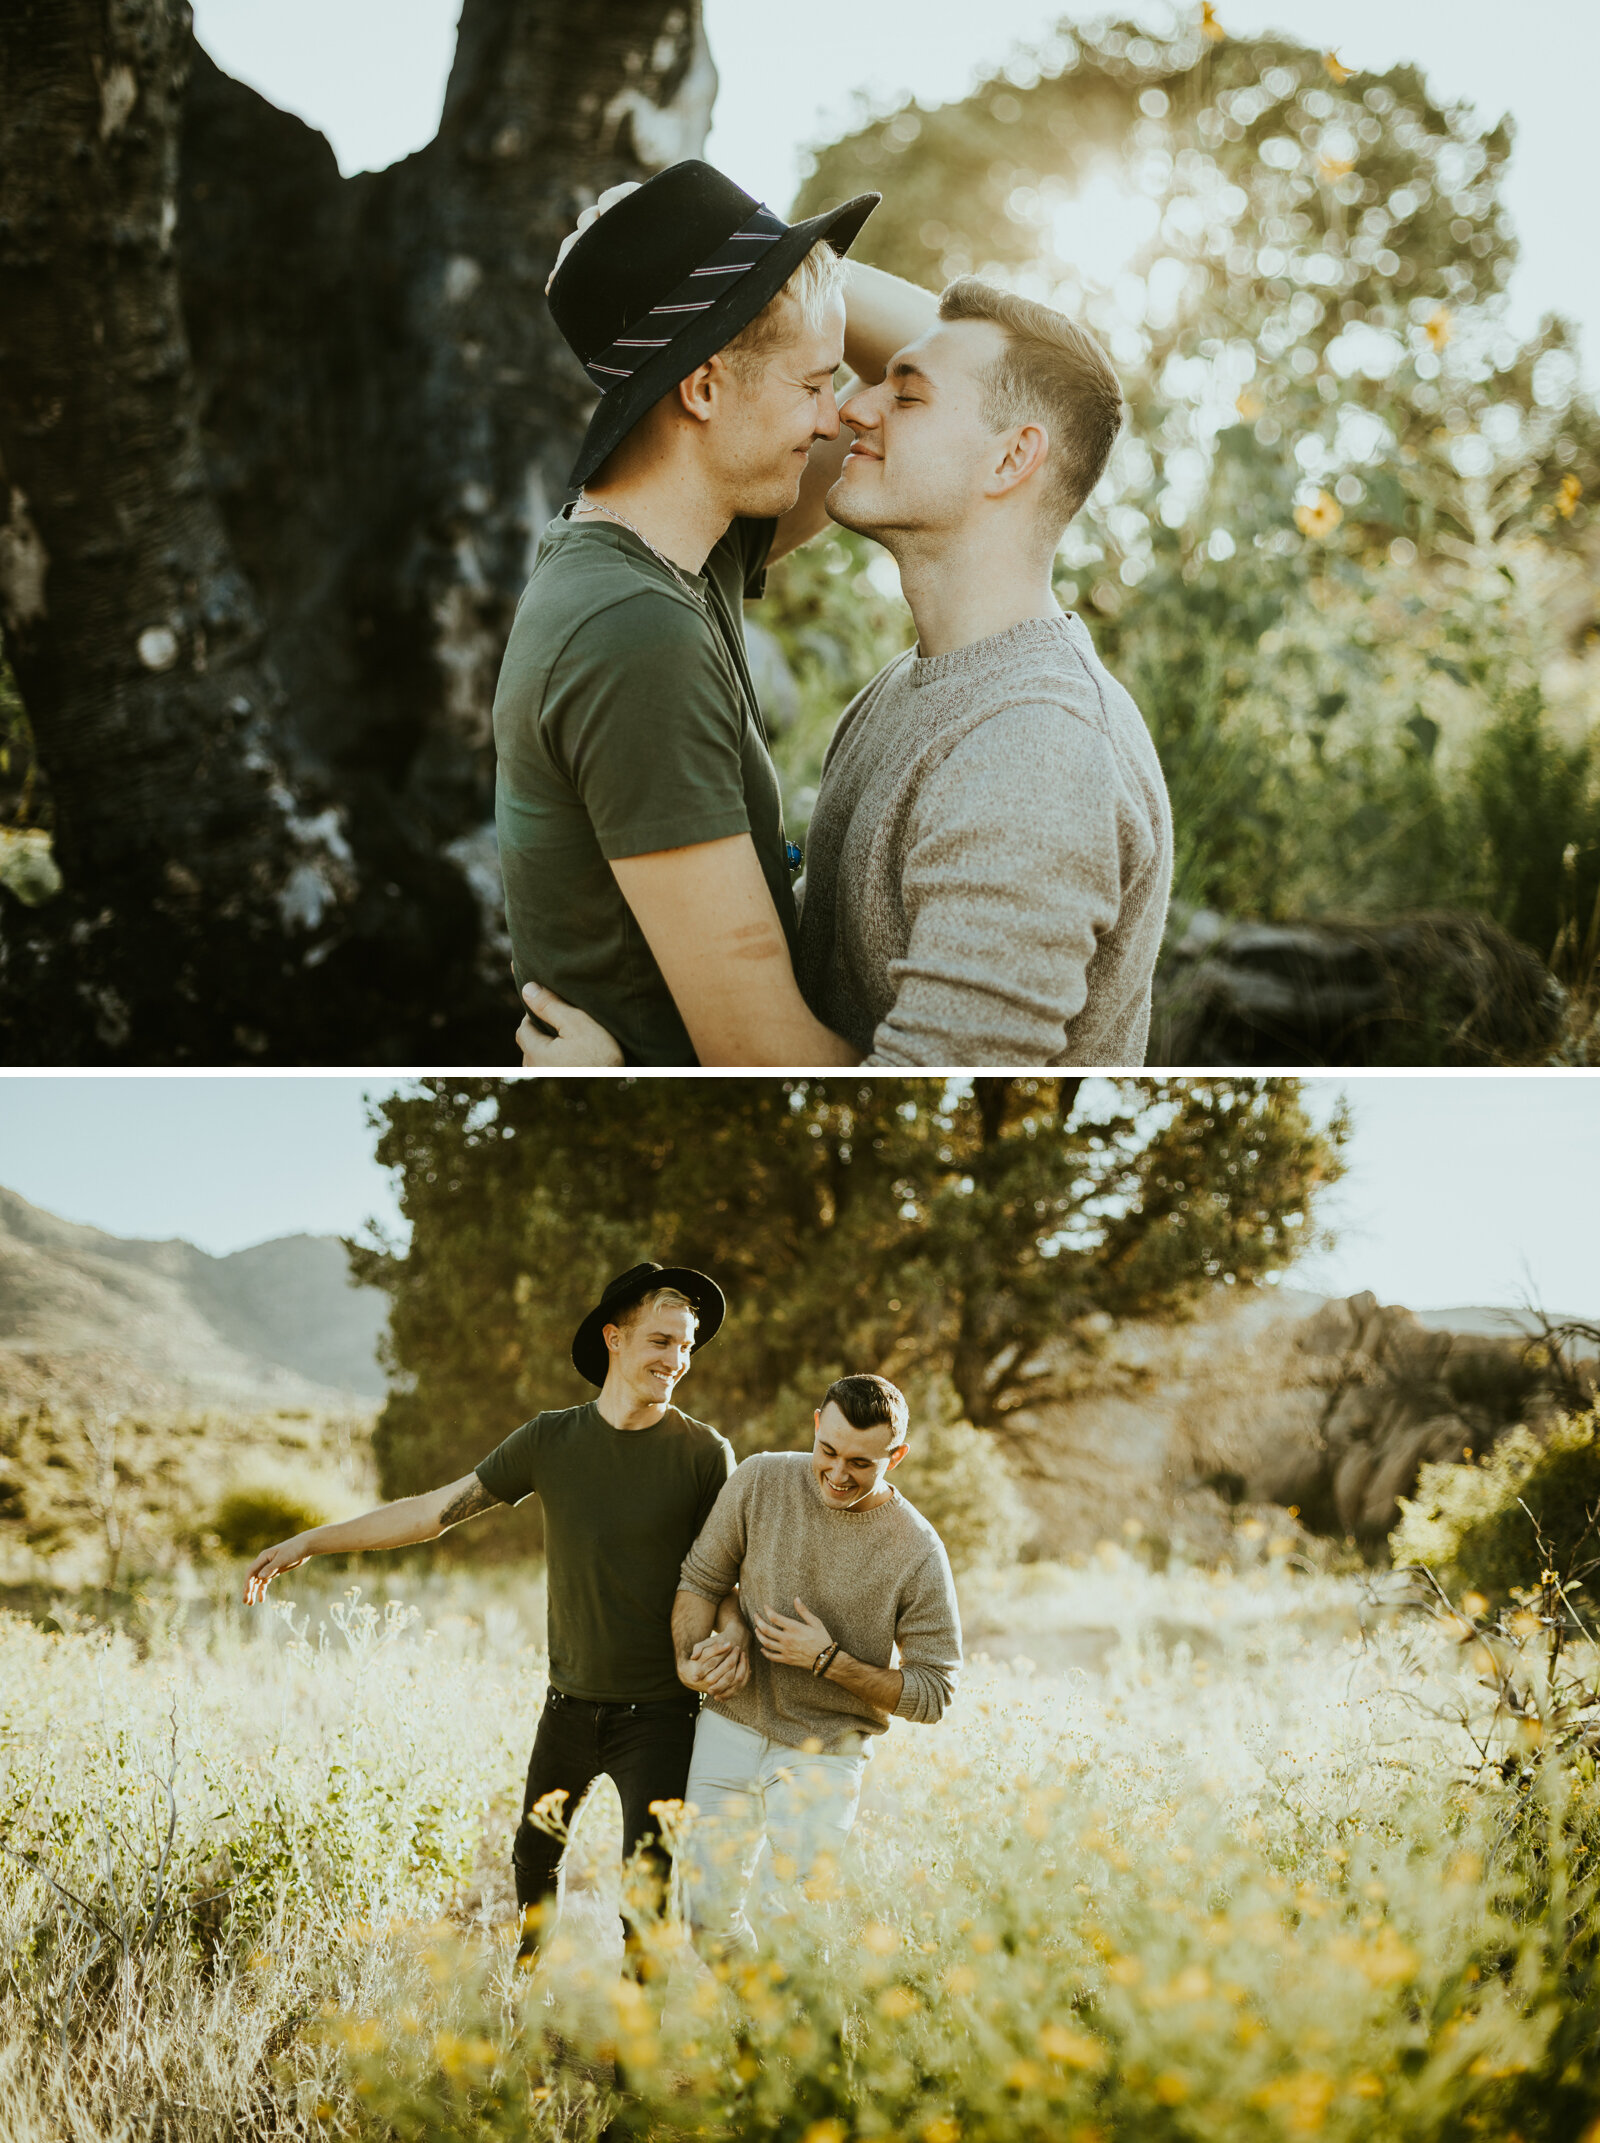 These 5 Photo Poses For Couples Are So Easy To Master